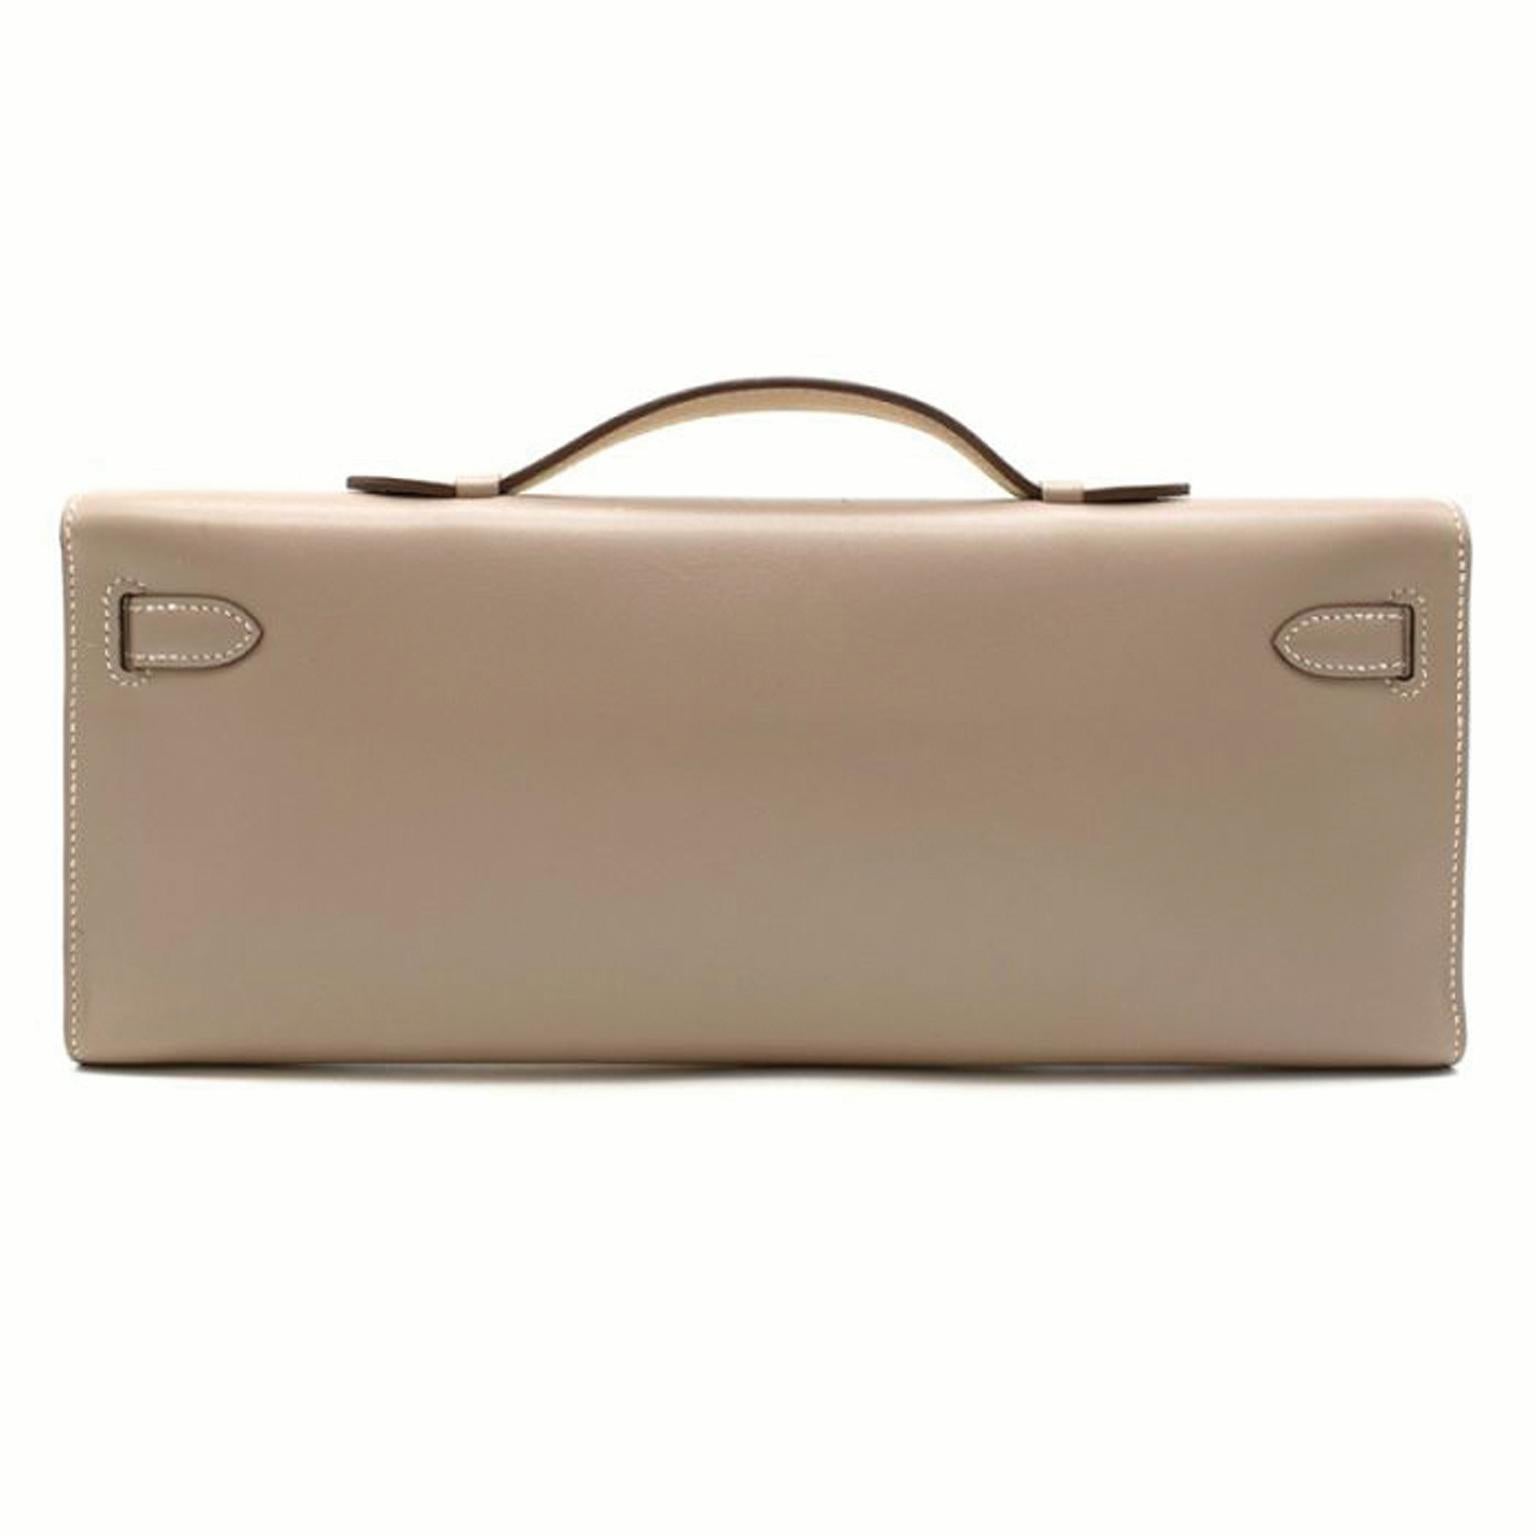 Crafted in France from supple swift leather, this exotic Agile Kelly Cut Clutch Bag by Hermès features tonal stitching, front straps and a top flat handle. The toggle closure is accented by silver-tone Guilloche palladium hardware and opens to